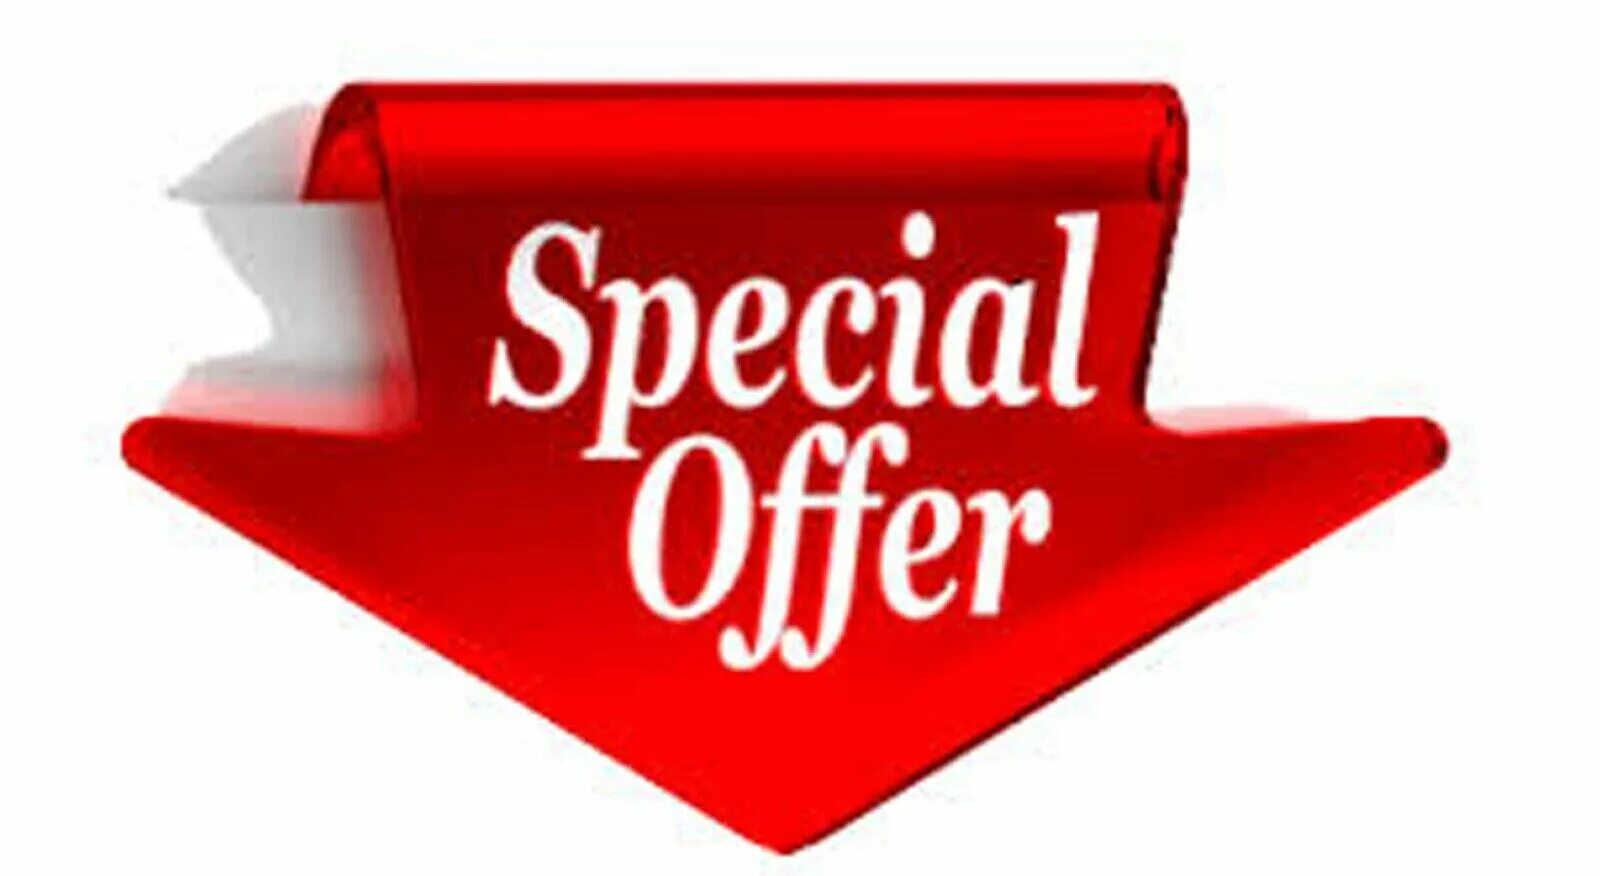 Special offer. Special offer на прозрачном фоне. Special offer discount. Offer лого. Great offers